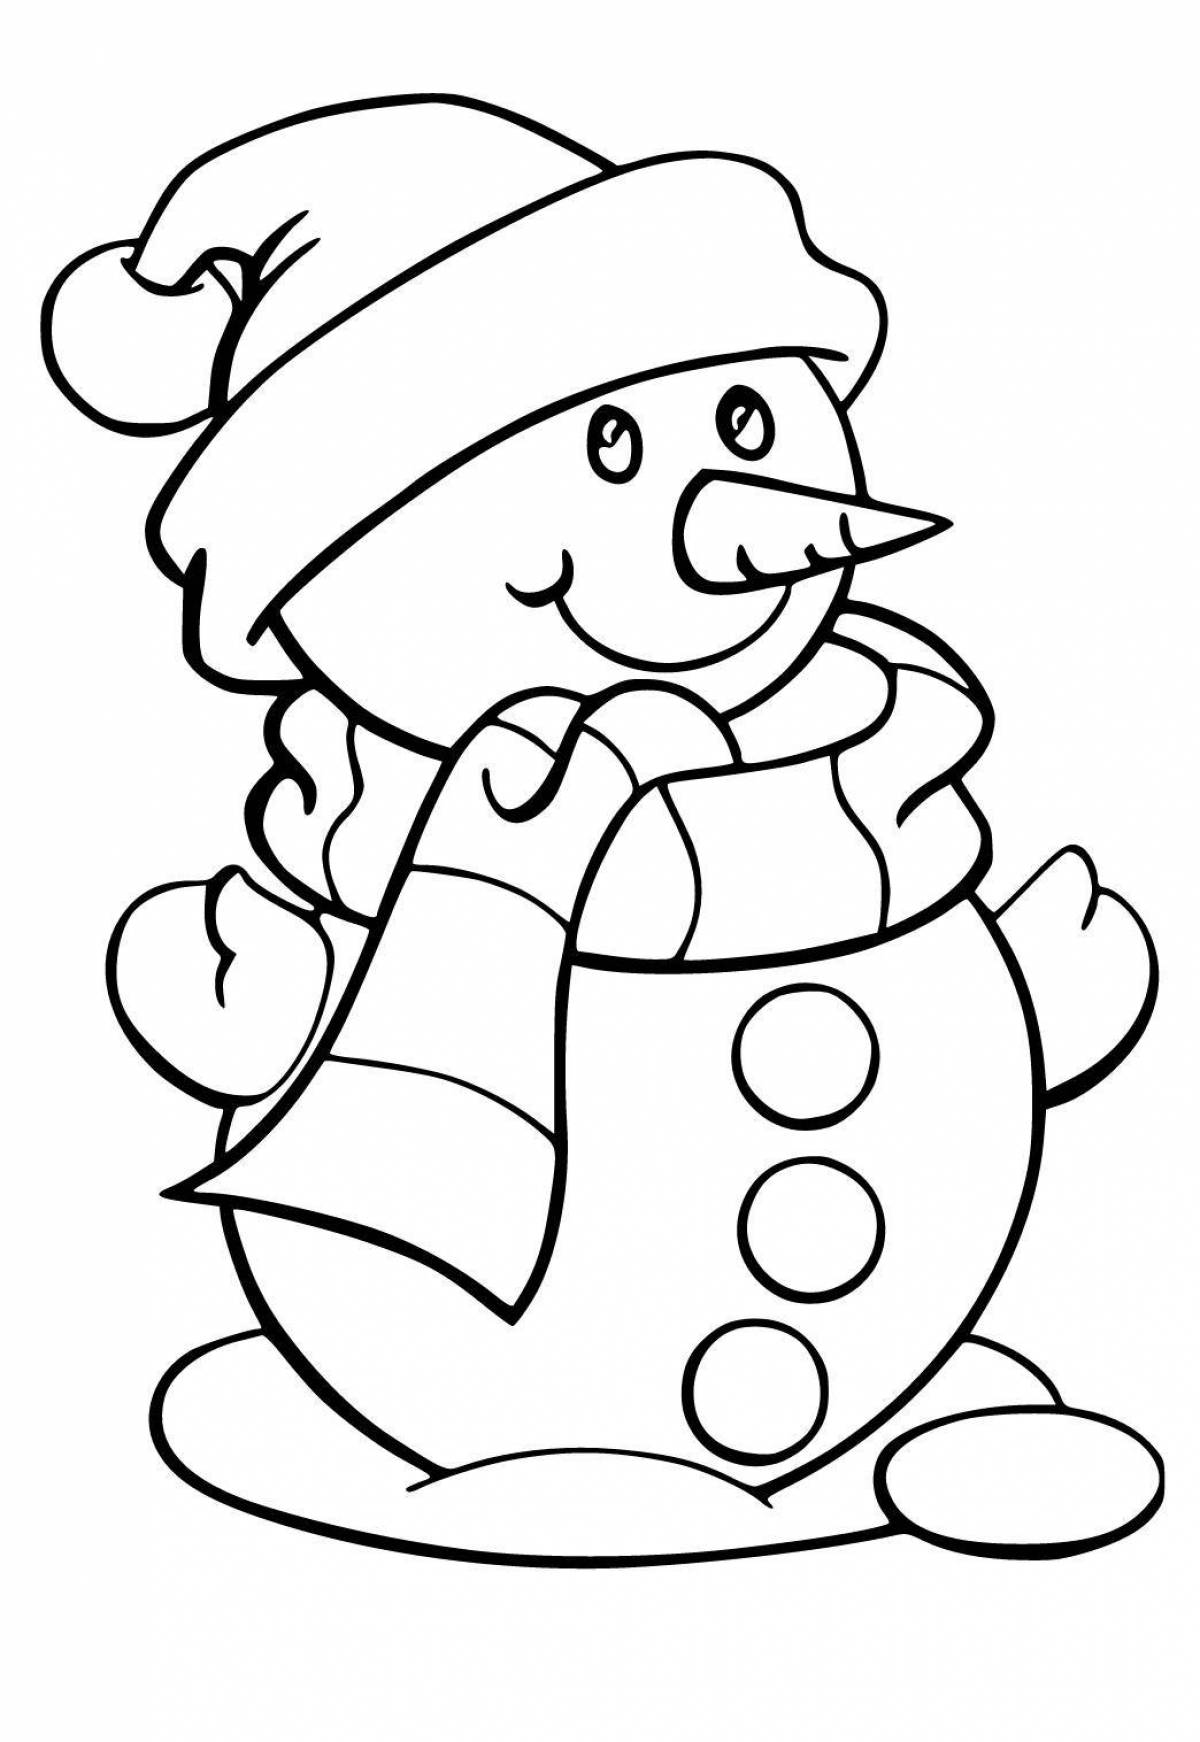 Exciting coloring cute snowman